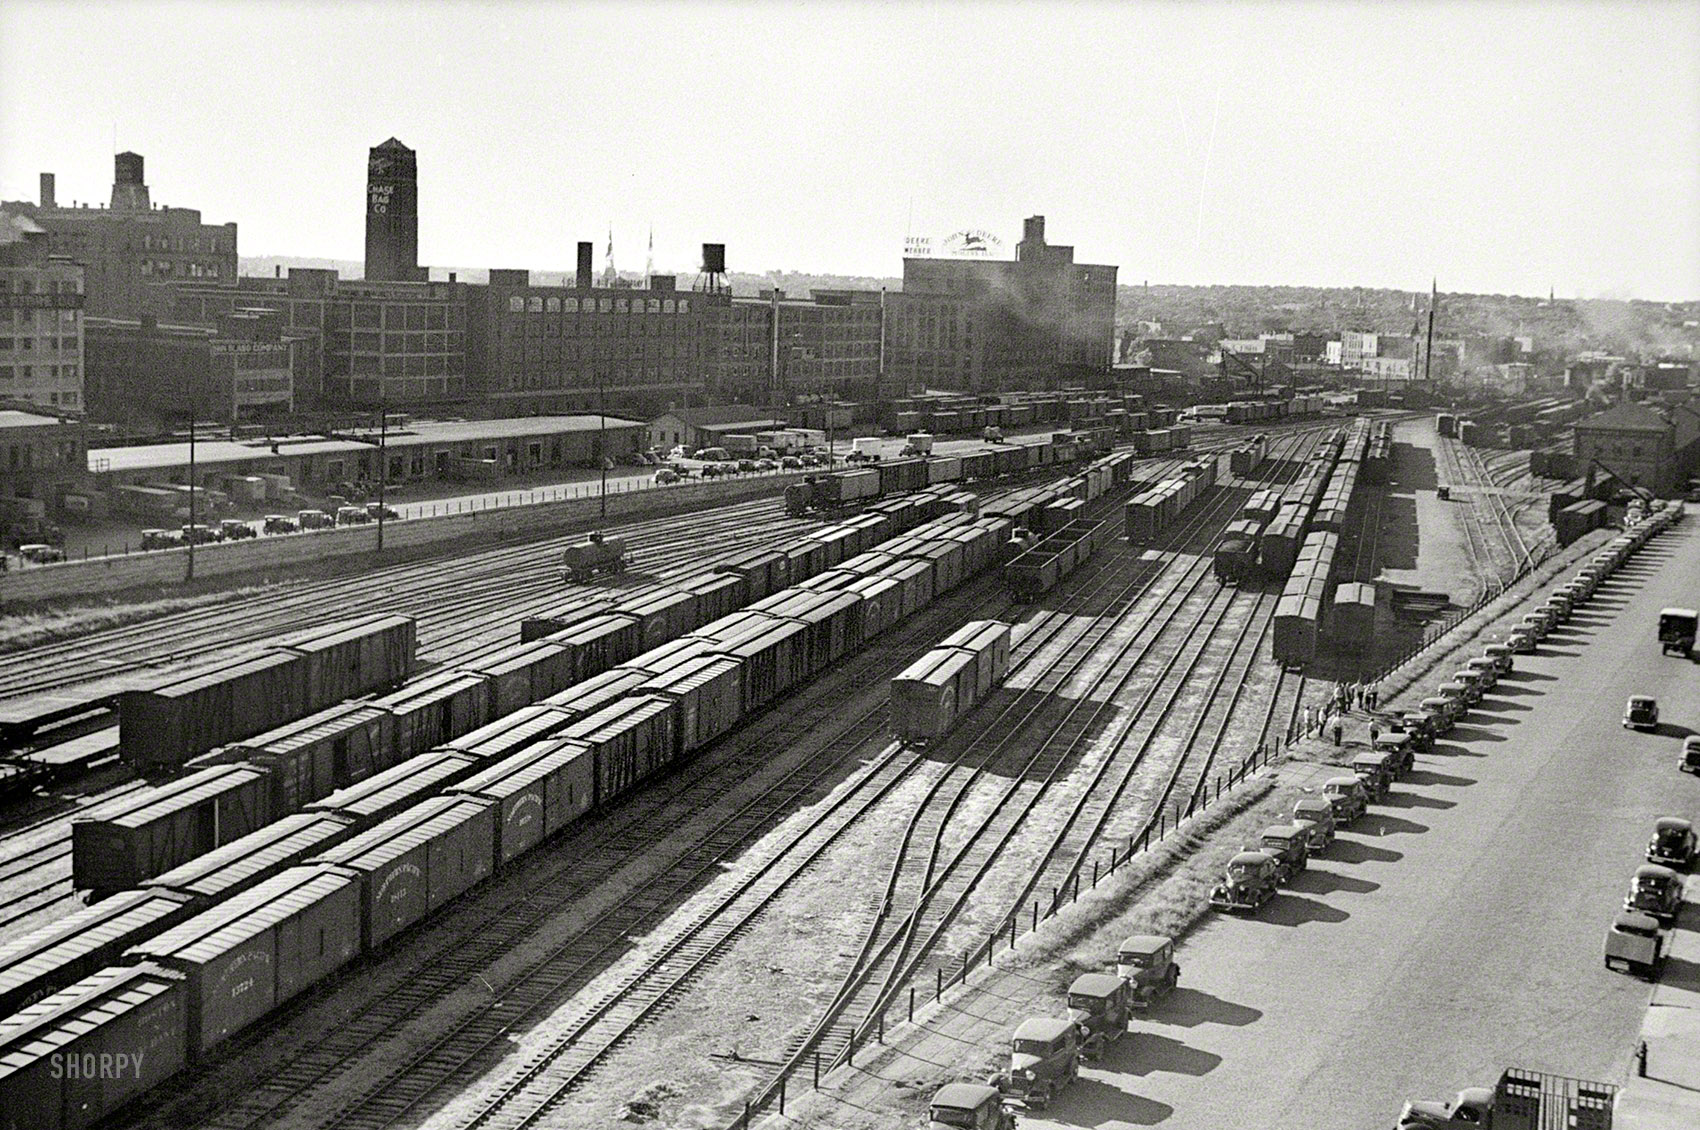 September 1939. "Railroad yards, wholesale district, Minneapolis, Minnesota." A nice view of the Chase Bag tower. Photo by John Vachon. View full size.